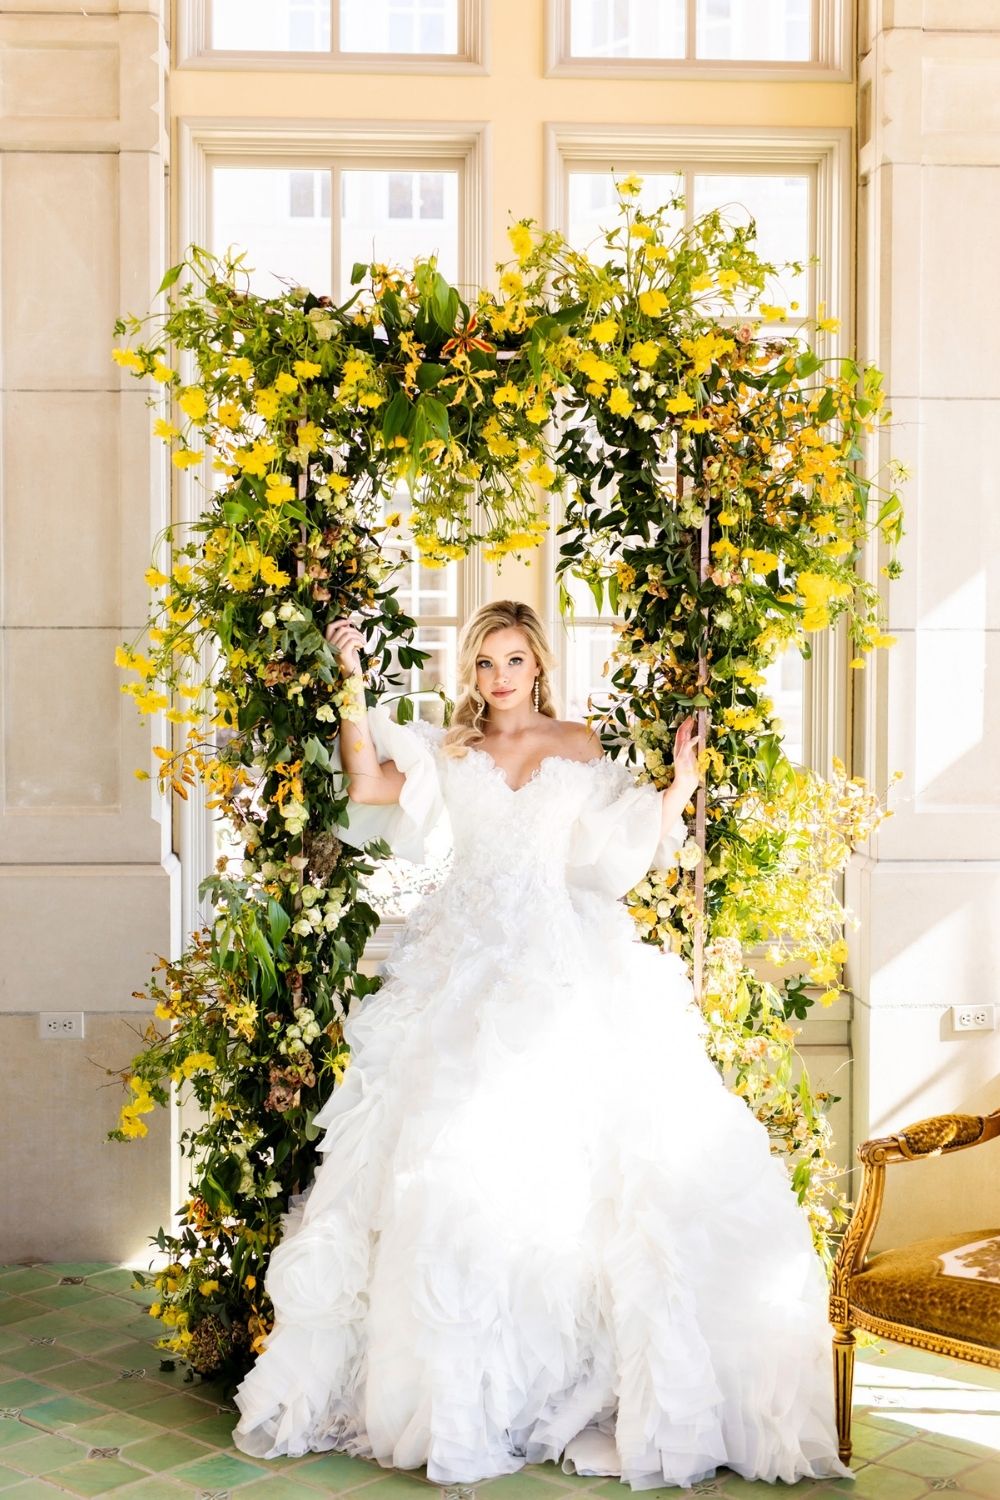 Bride in a white Ball gown wedding dress standing under yellow floral arch